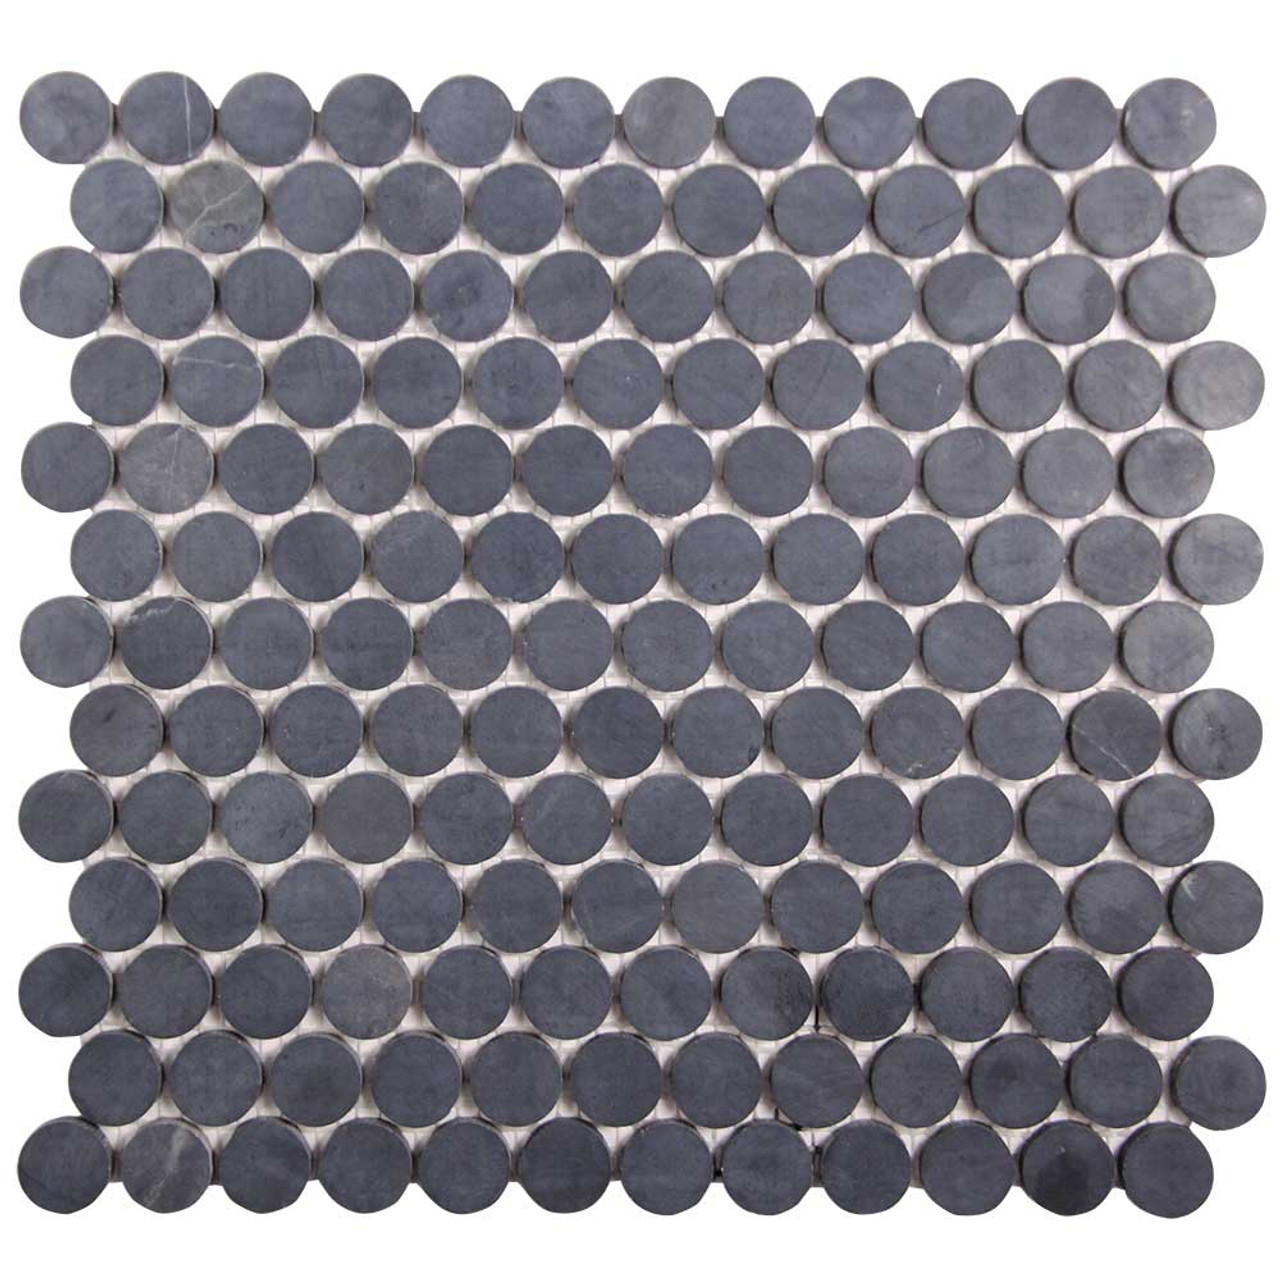 Black Honed Penny Round Marble Mosaic, 11 1/4x11 3/4x3/8